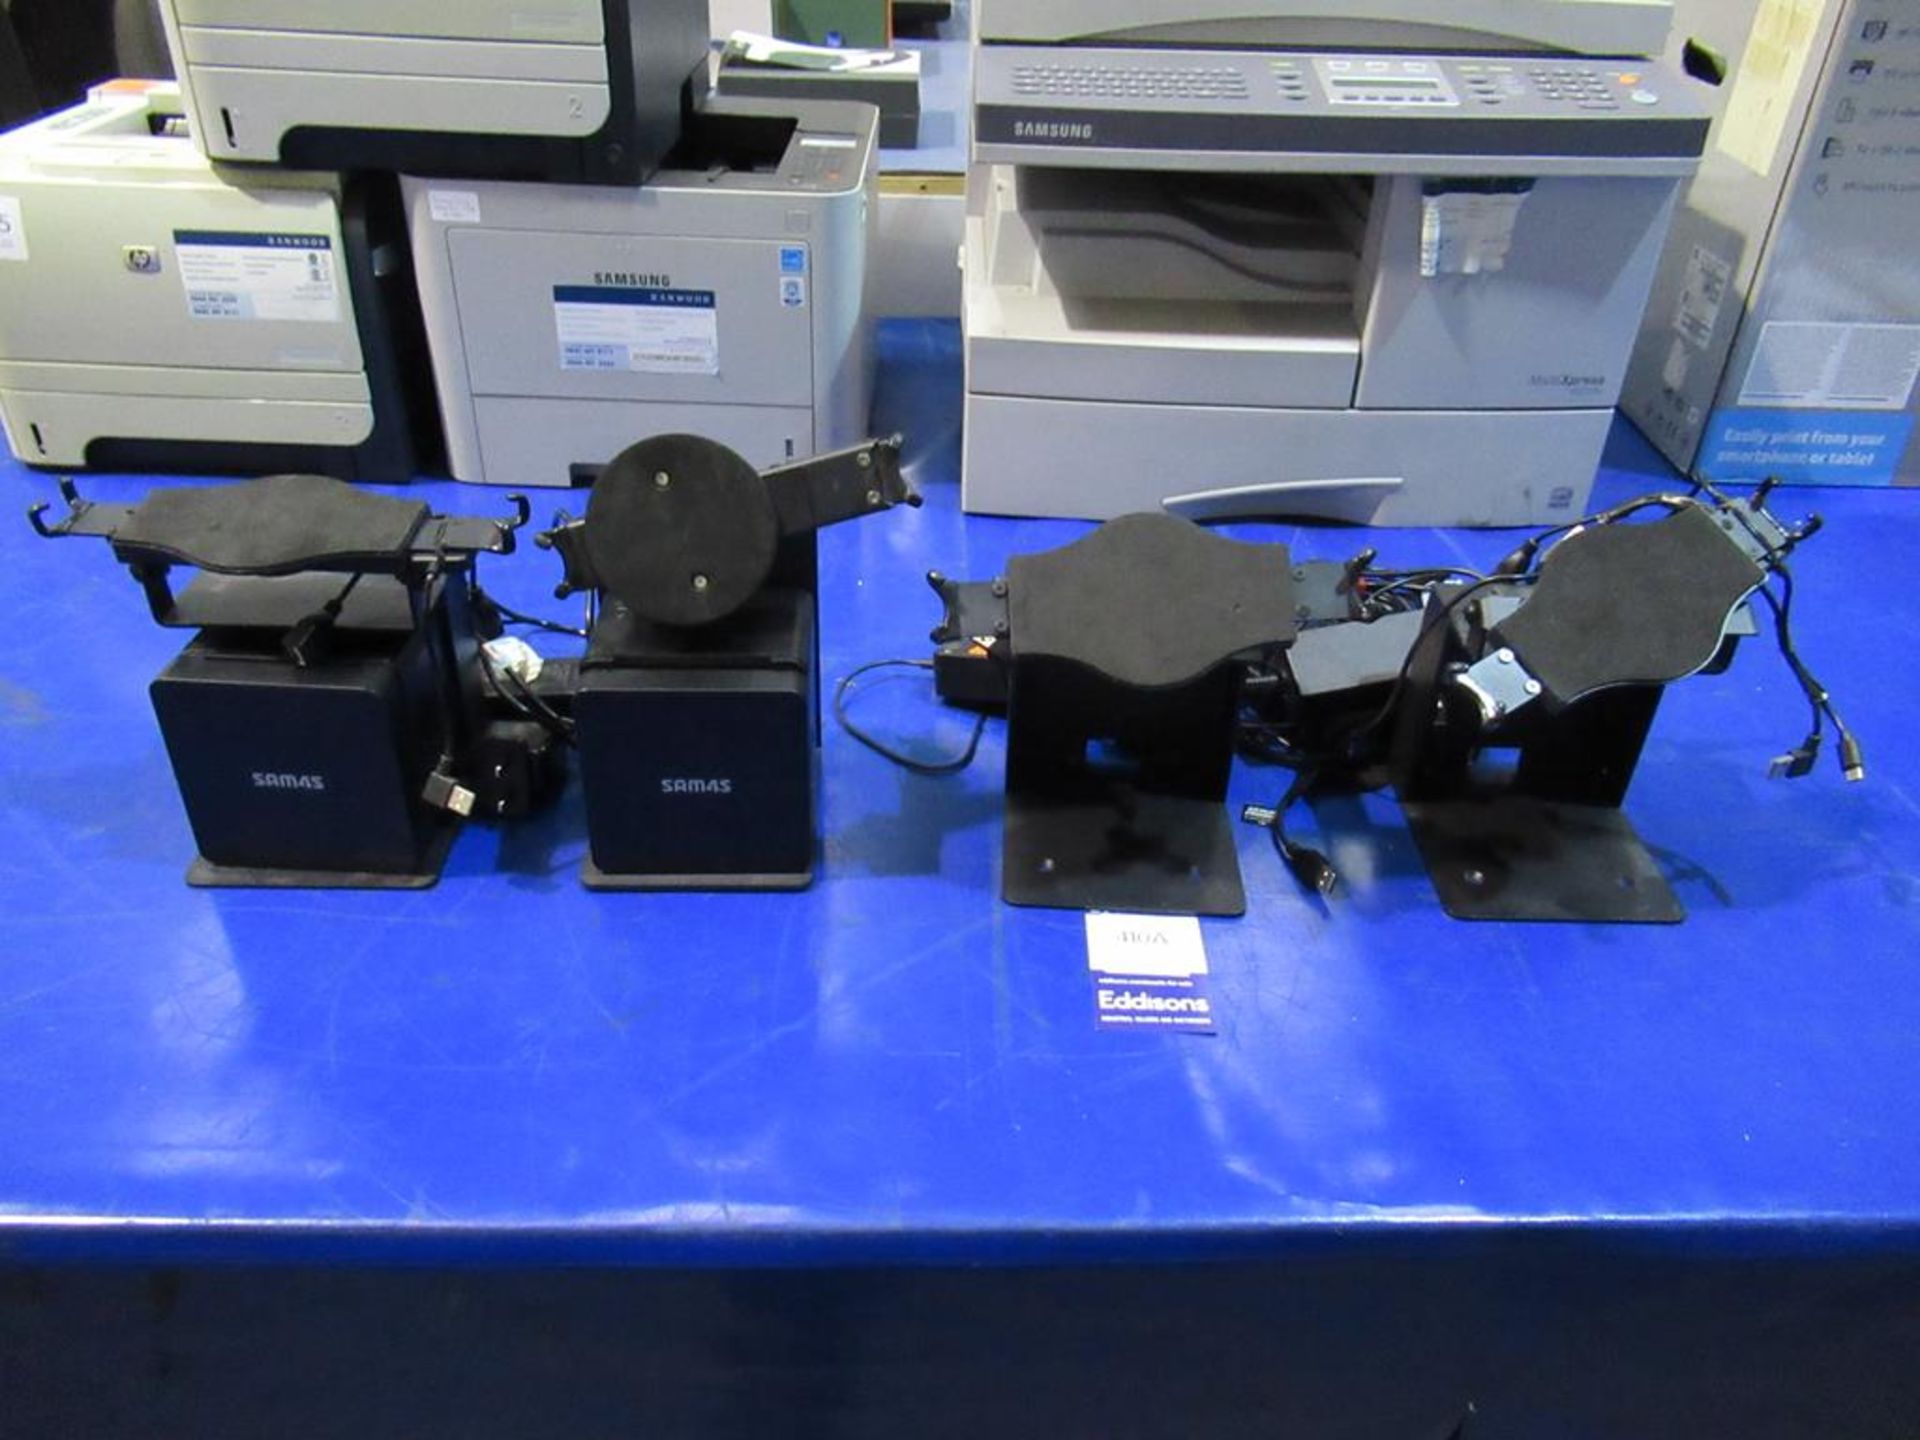 2x Used SAM4S Gcube Series Receipt Printer and 4x Various Stands & Cabling (unknown condition)